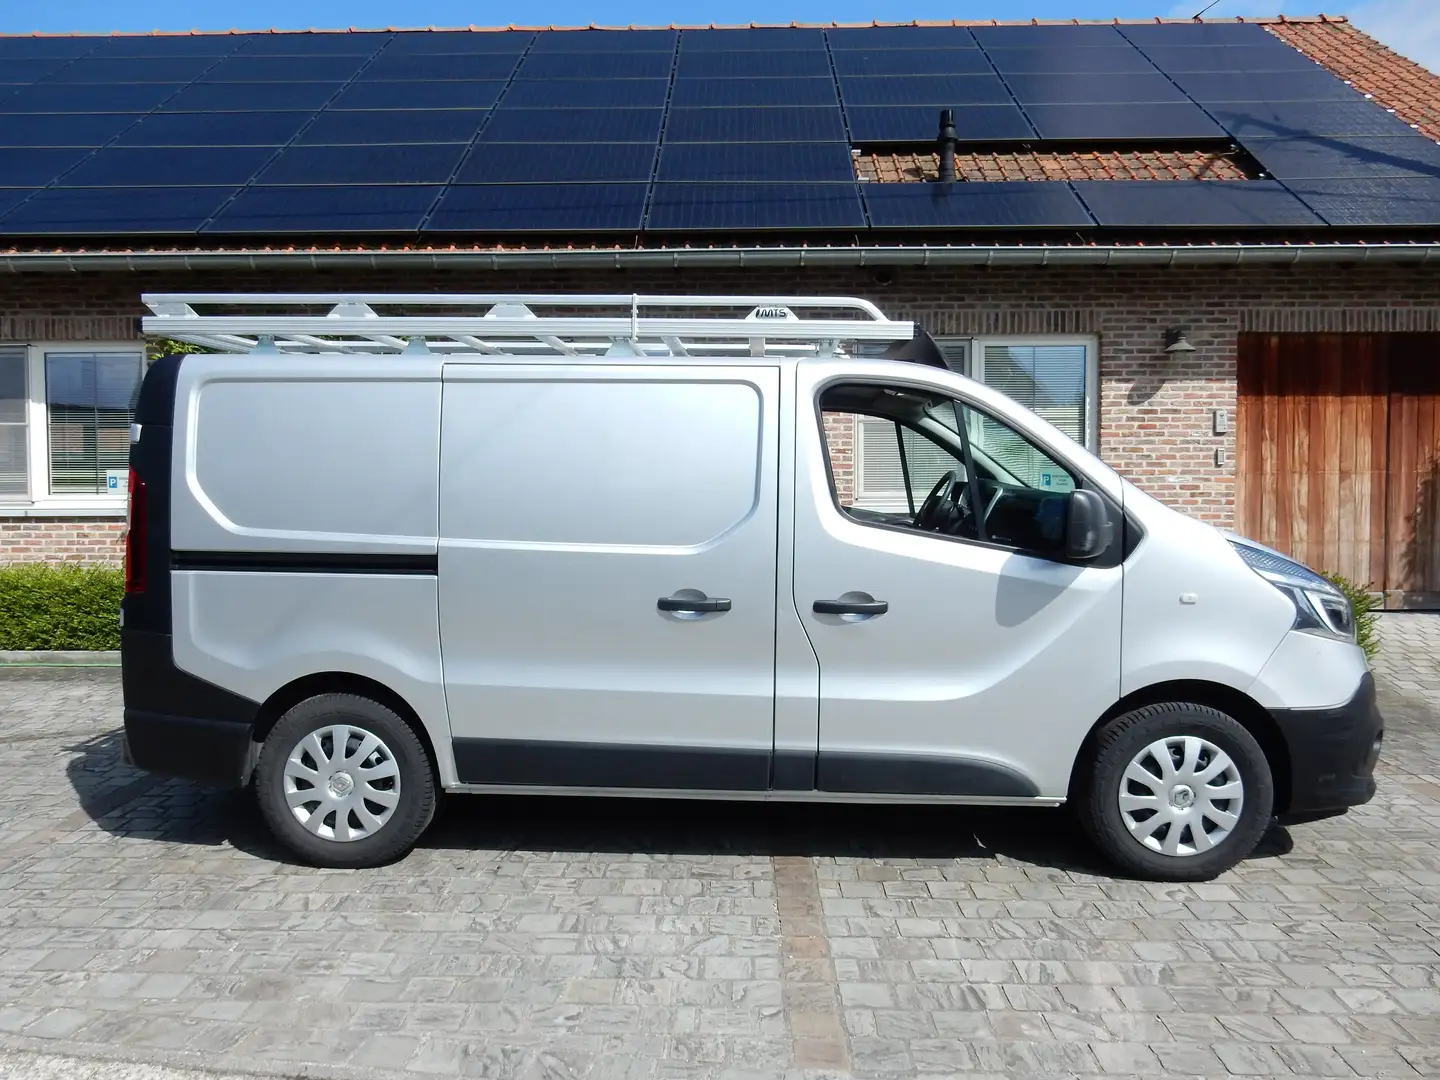 Renault Trafic 1.6dci LED bagagerek (13500Netto+Btw/Tva) Zilver - 1